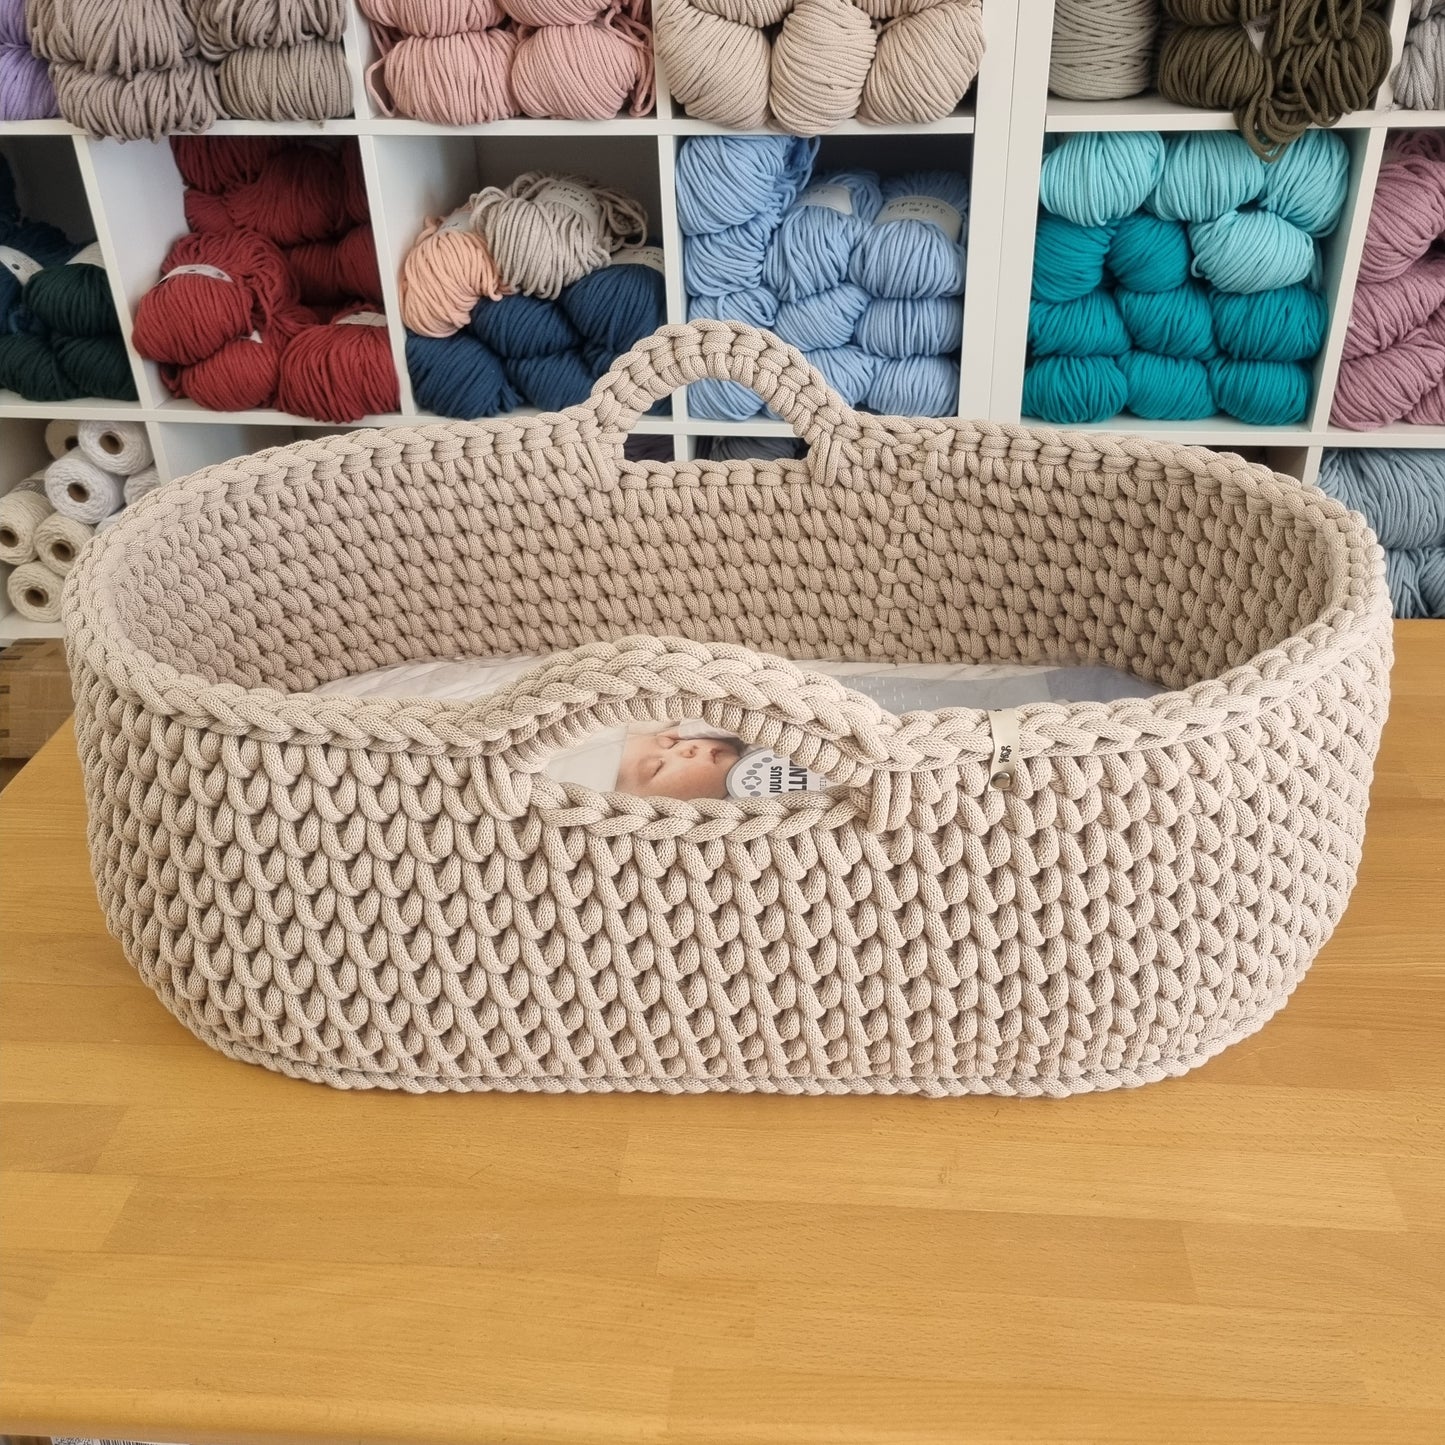 Moses basket baby cradle crocheted from Oeko-Tex cotton